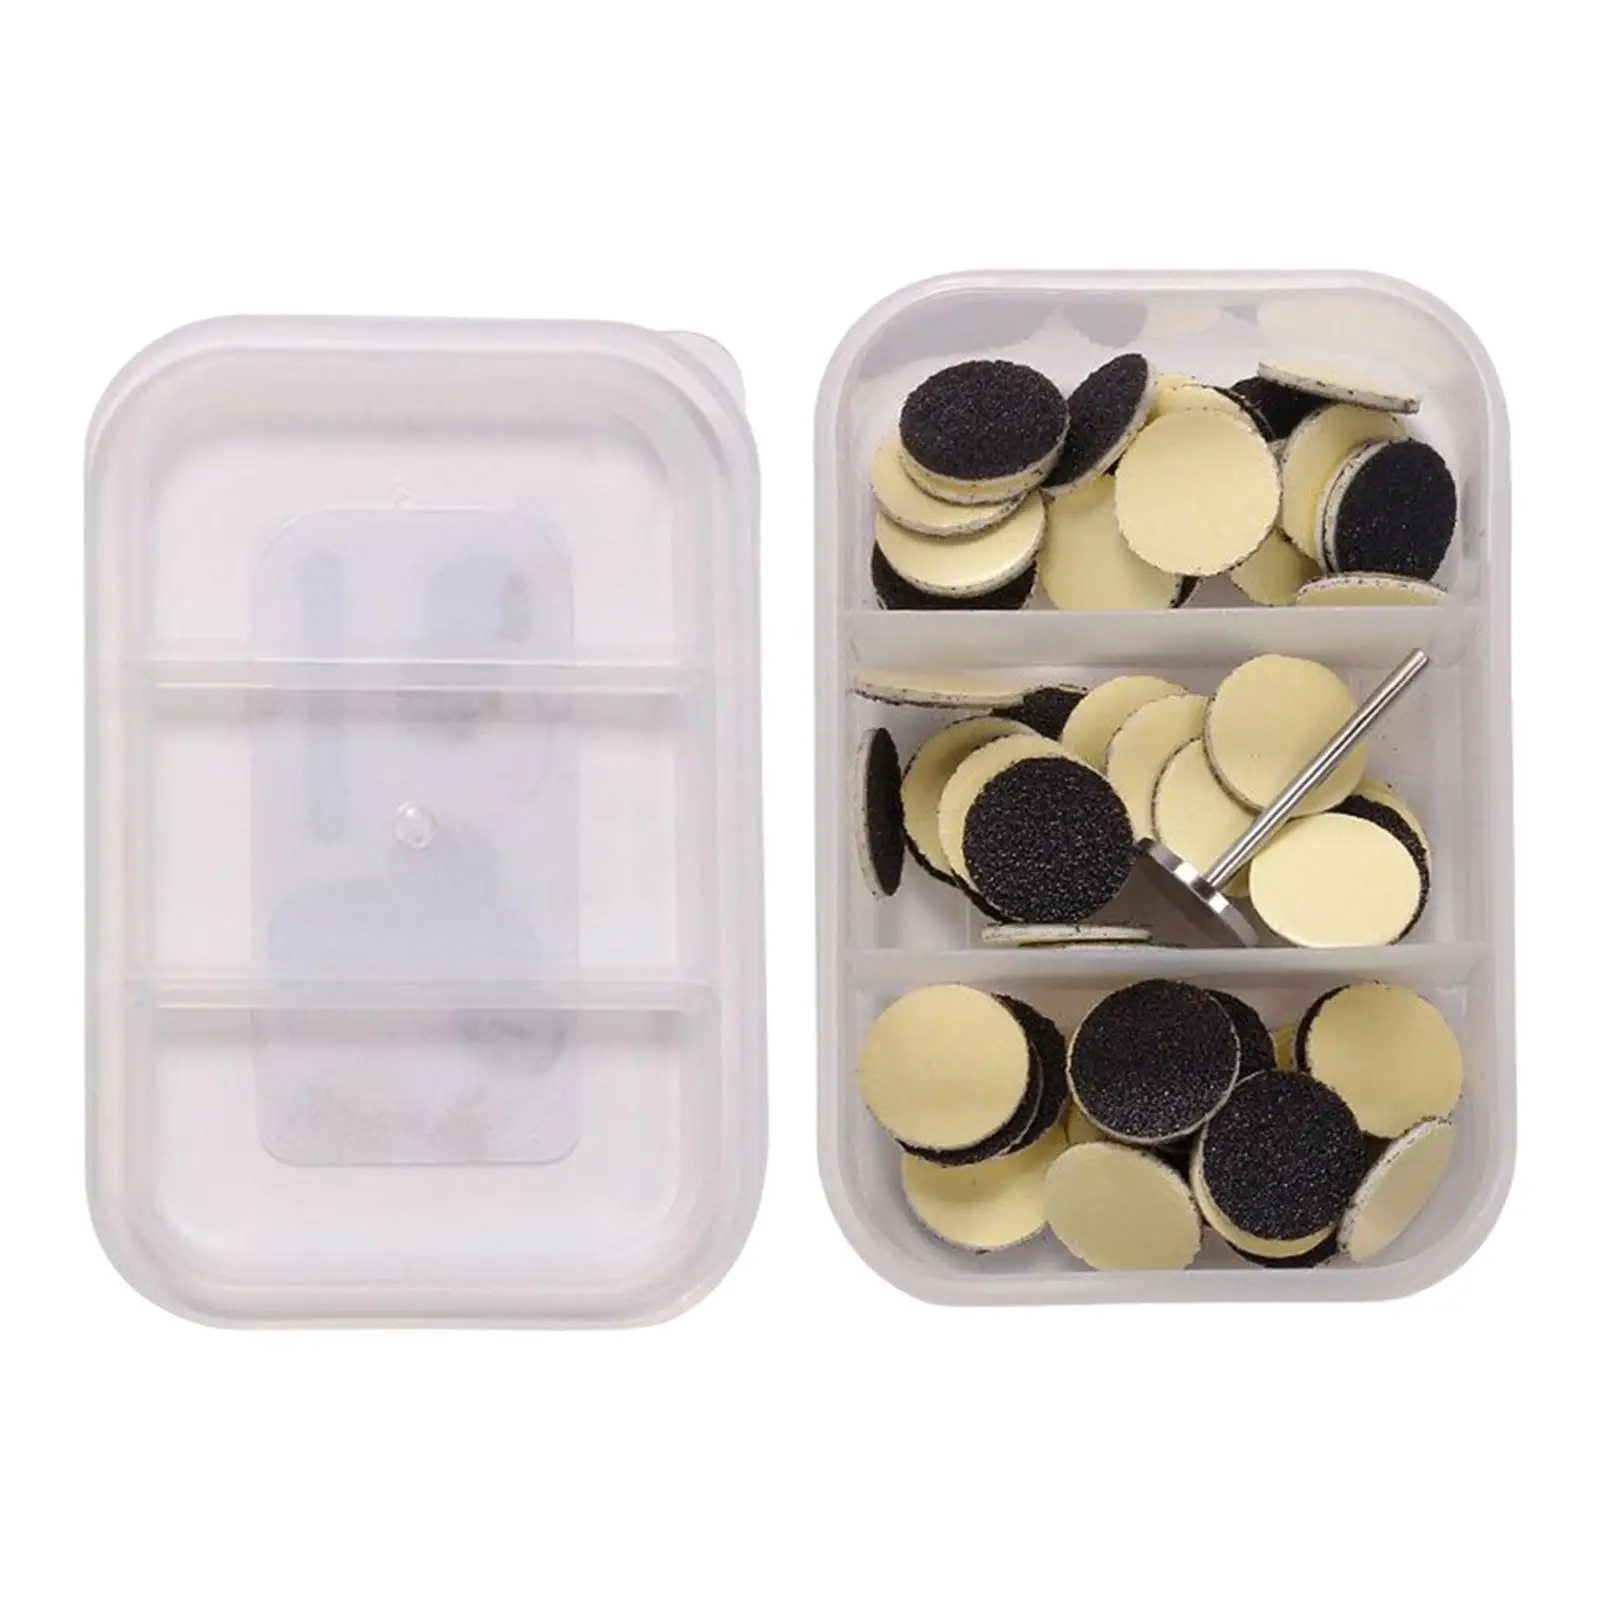 60 Pieces Replaceable Sanding Papers Self Adhesive with Storage Case Sanding Discs for Skin Electric Drill Grinder Rotary Tools